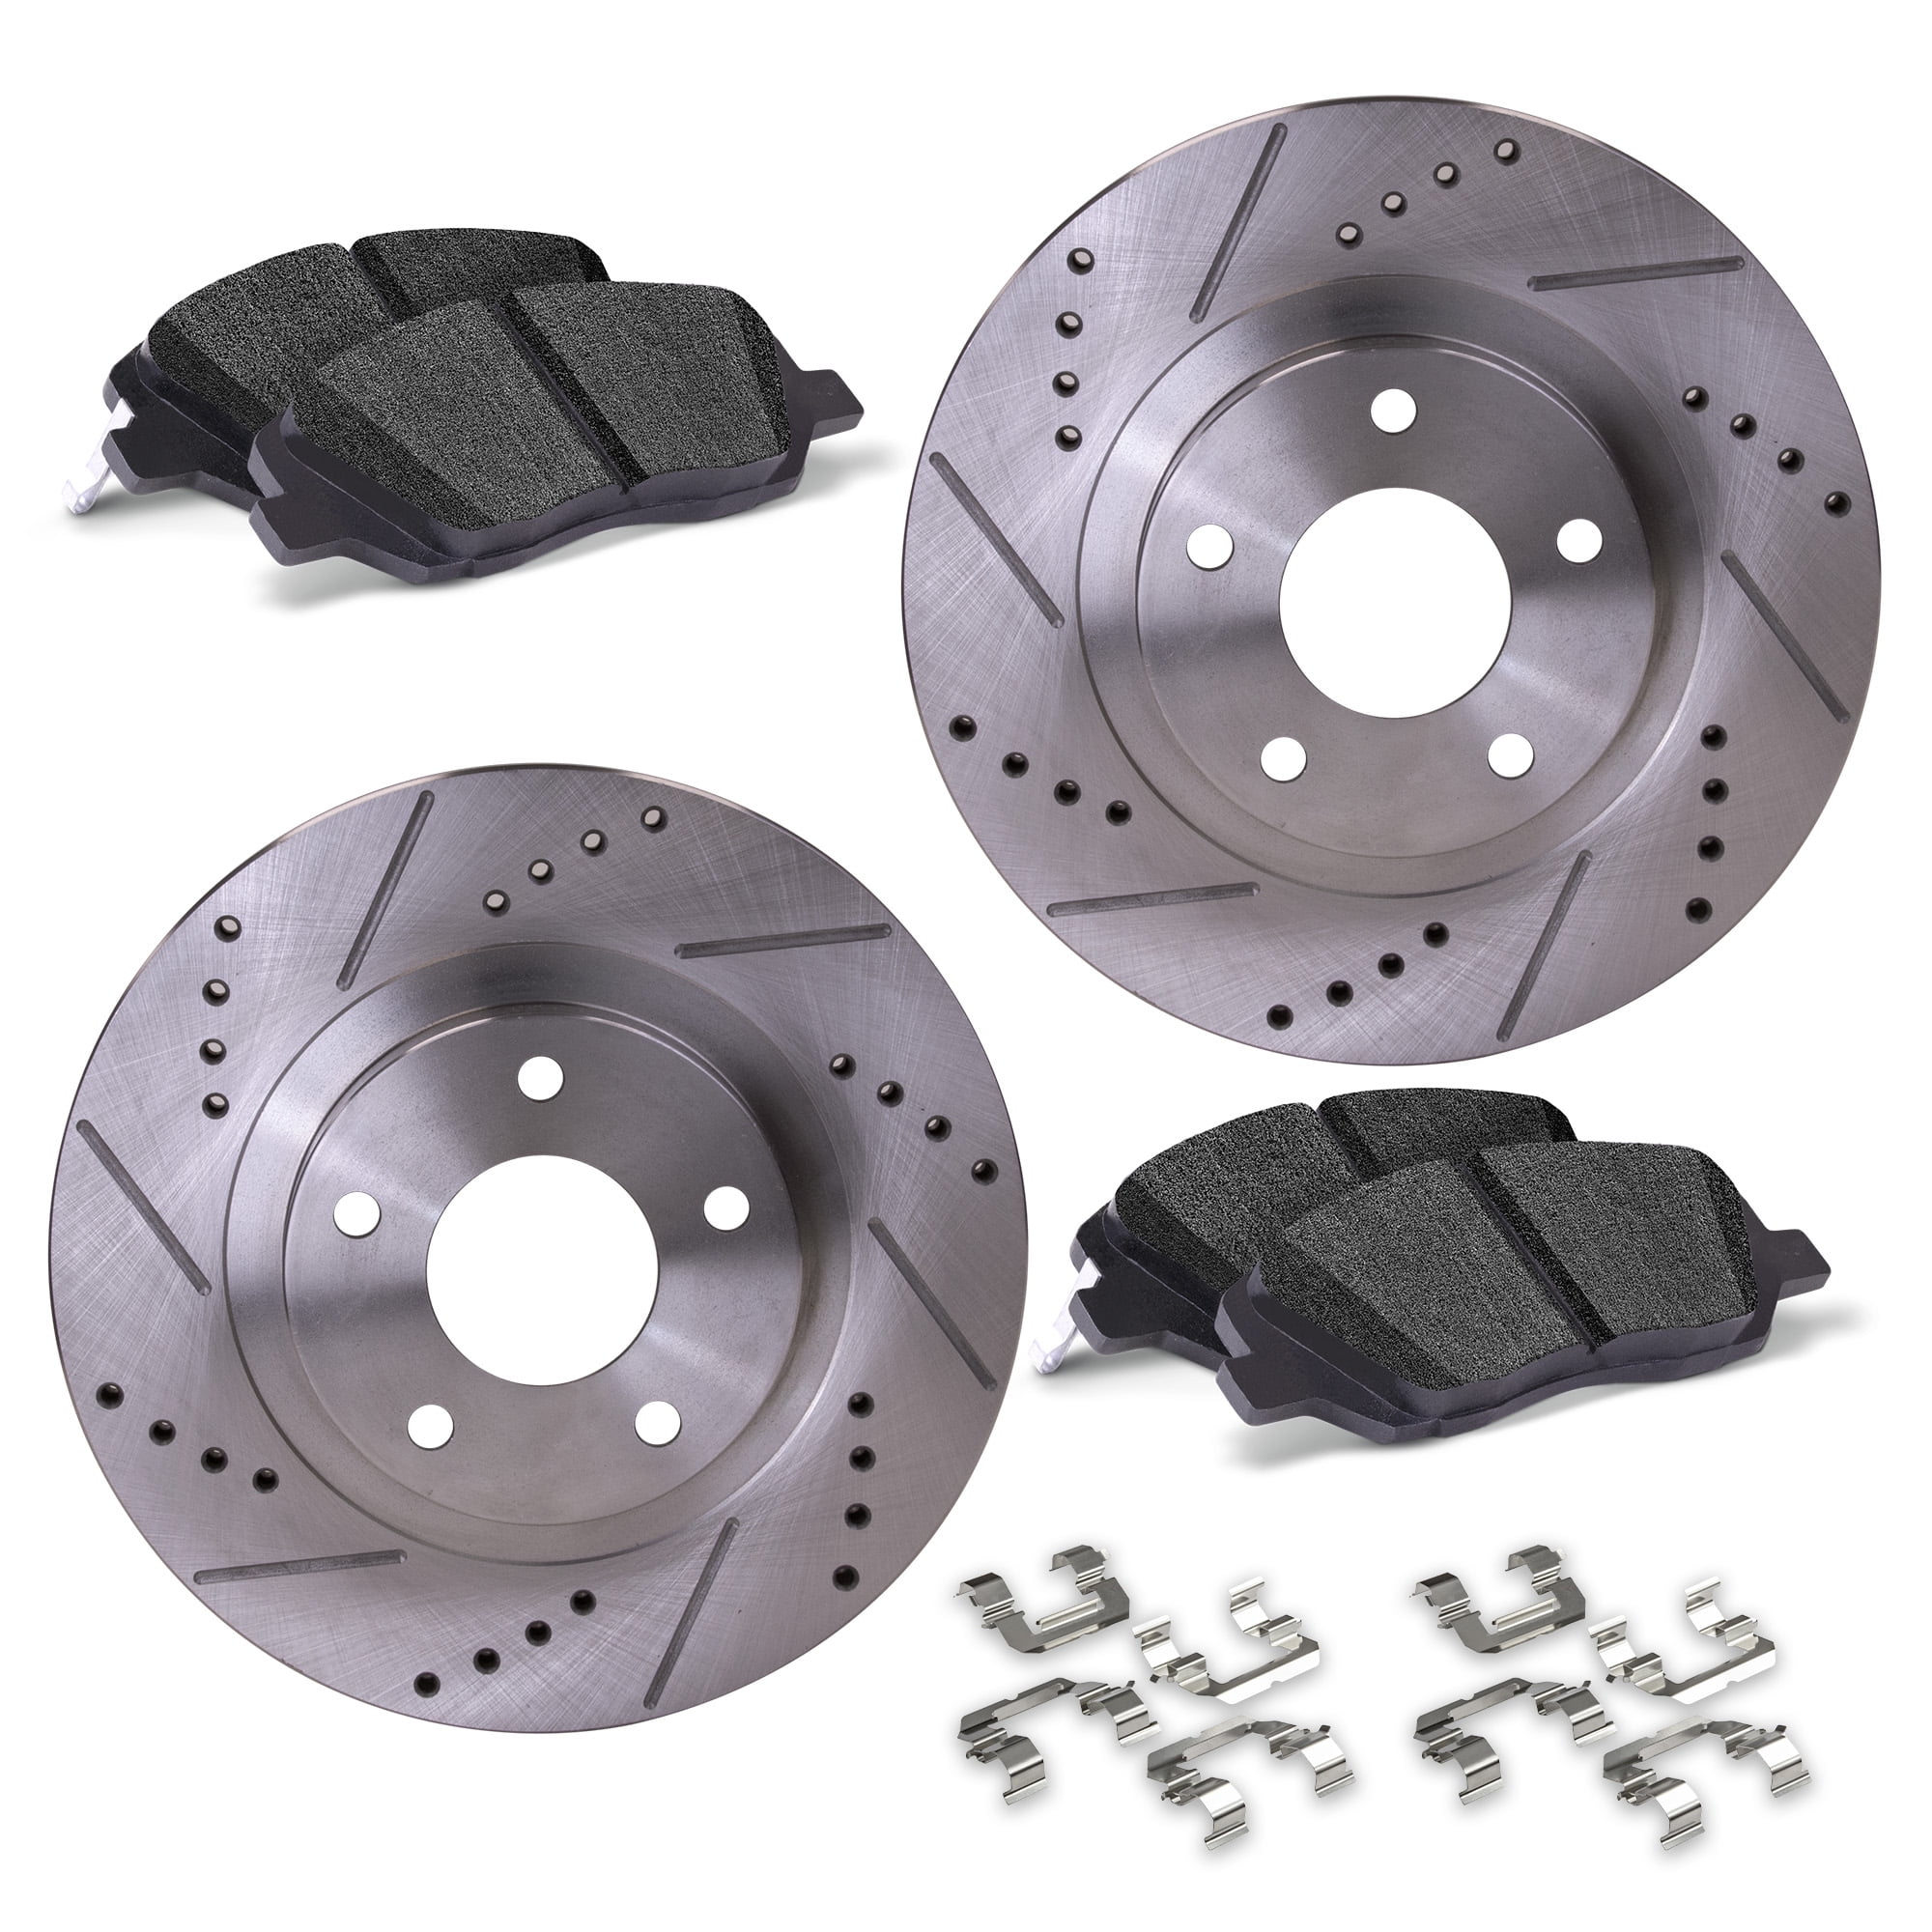 Rear] Max Brakes Geomet OE Rotors with Carbon Ceramic Pads